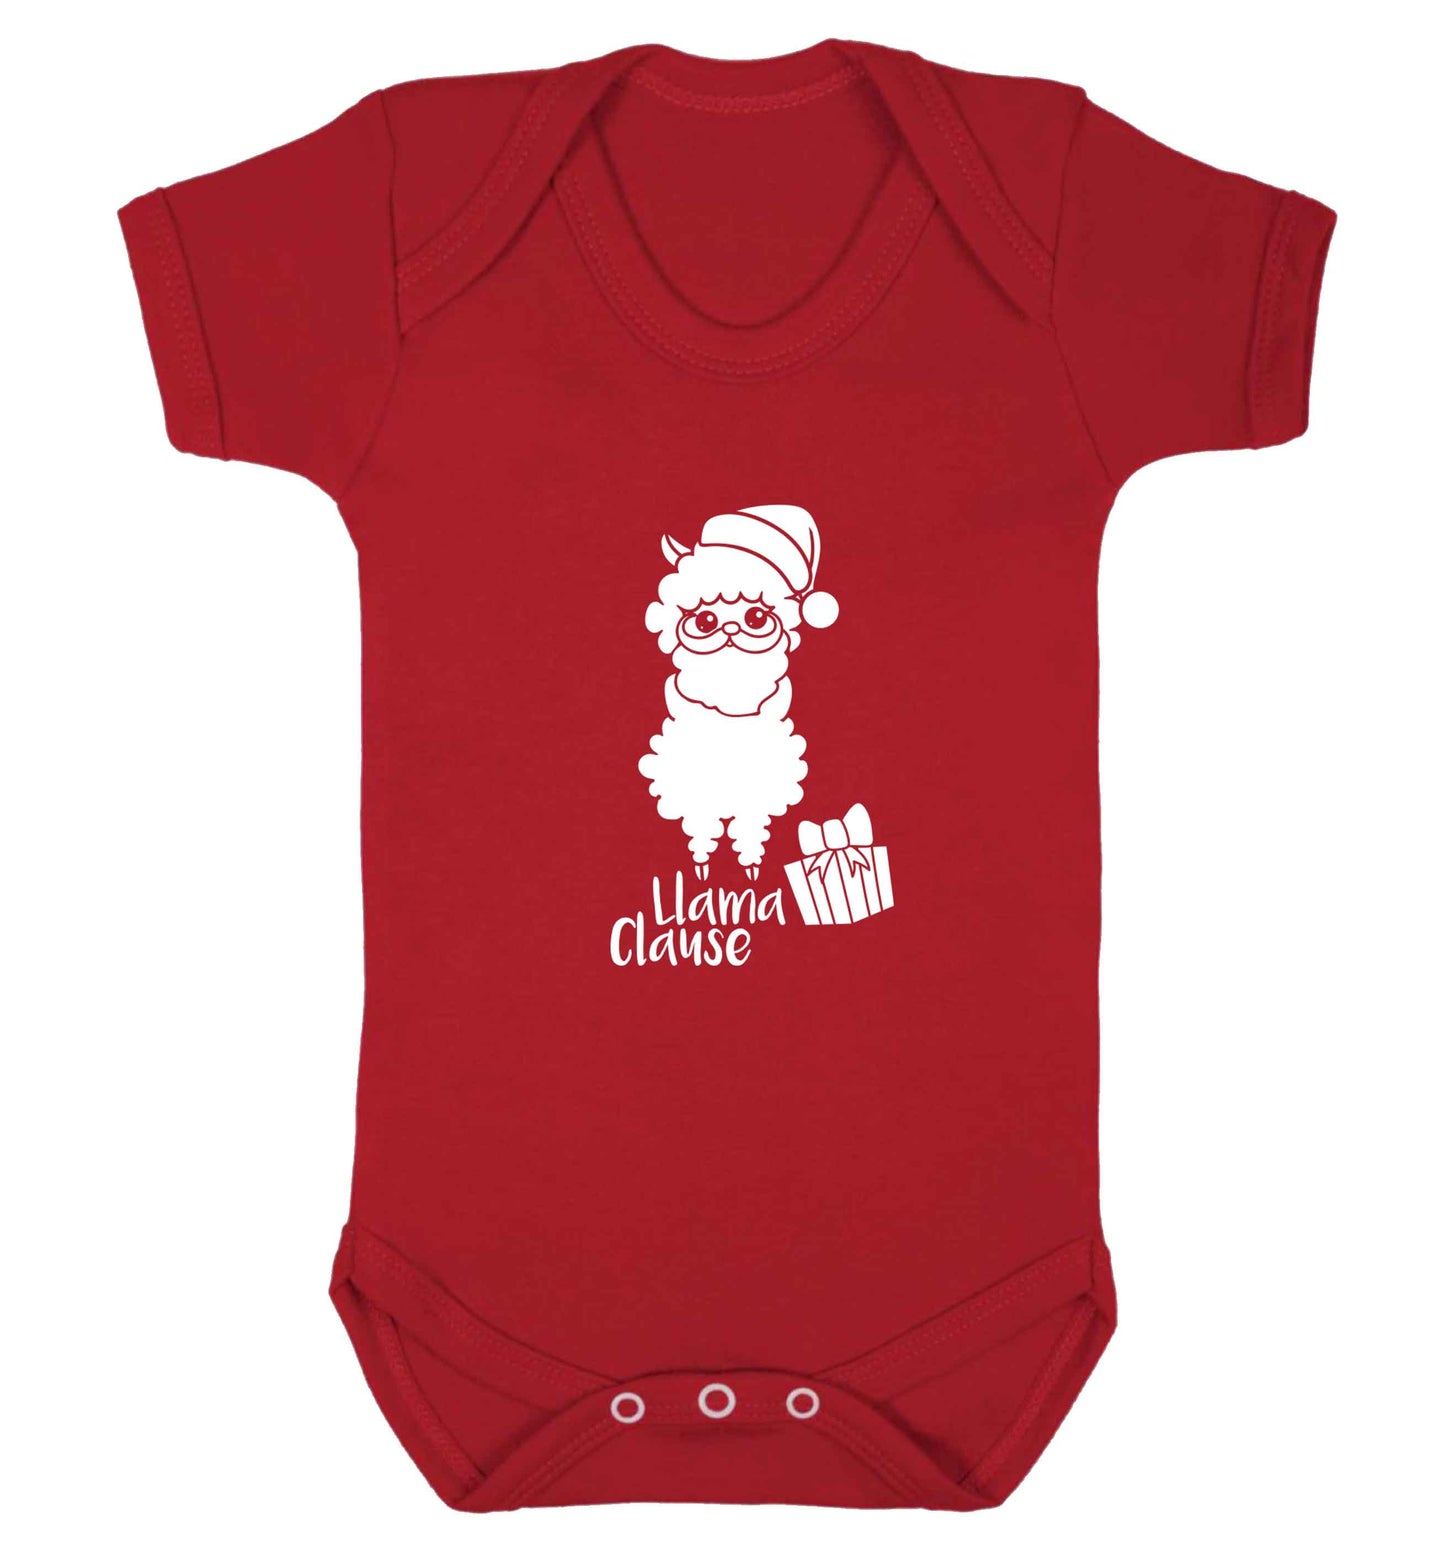 Llama Clause baby vest red 18-24 months